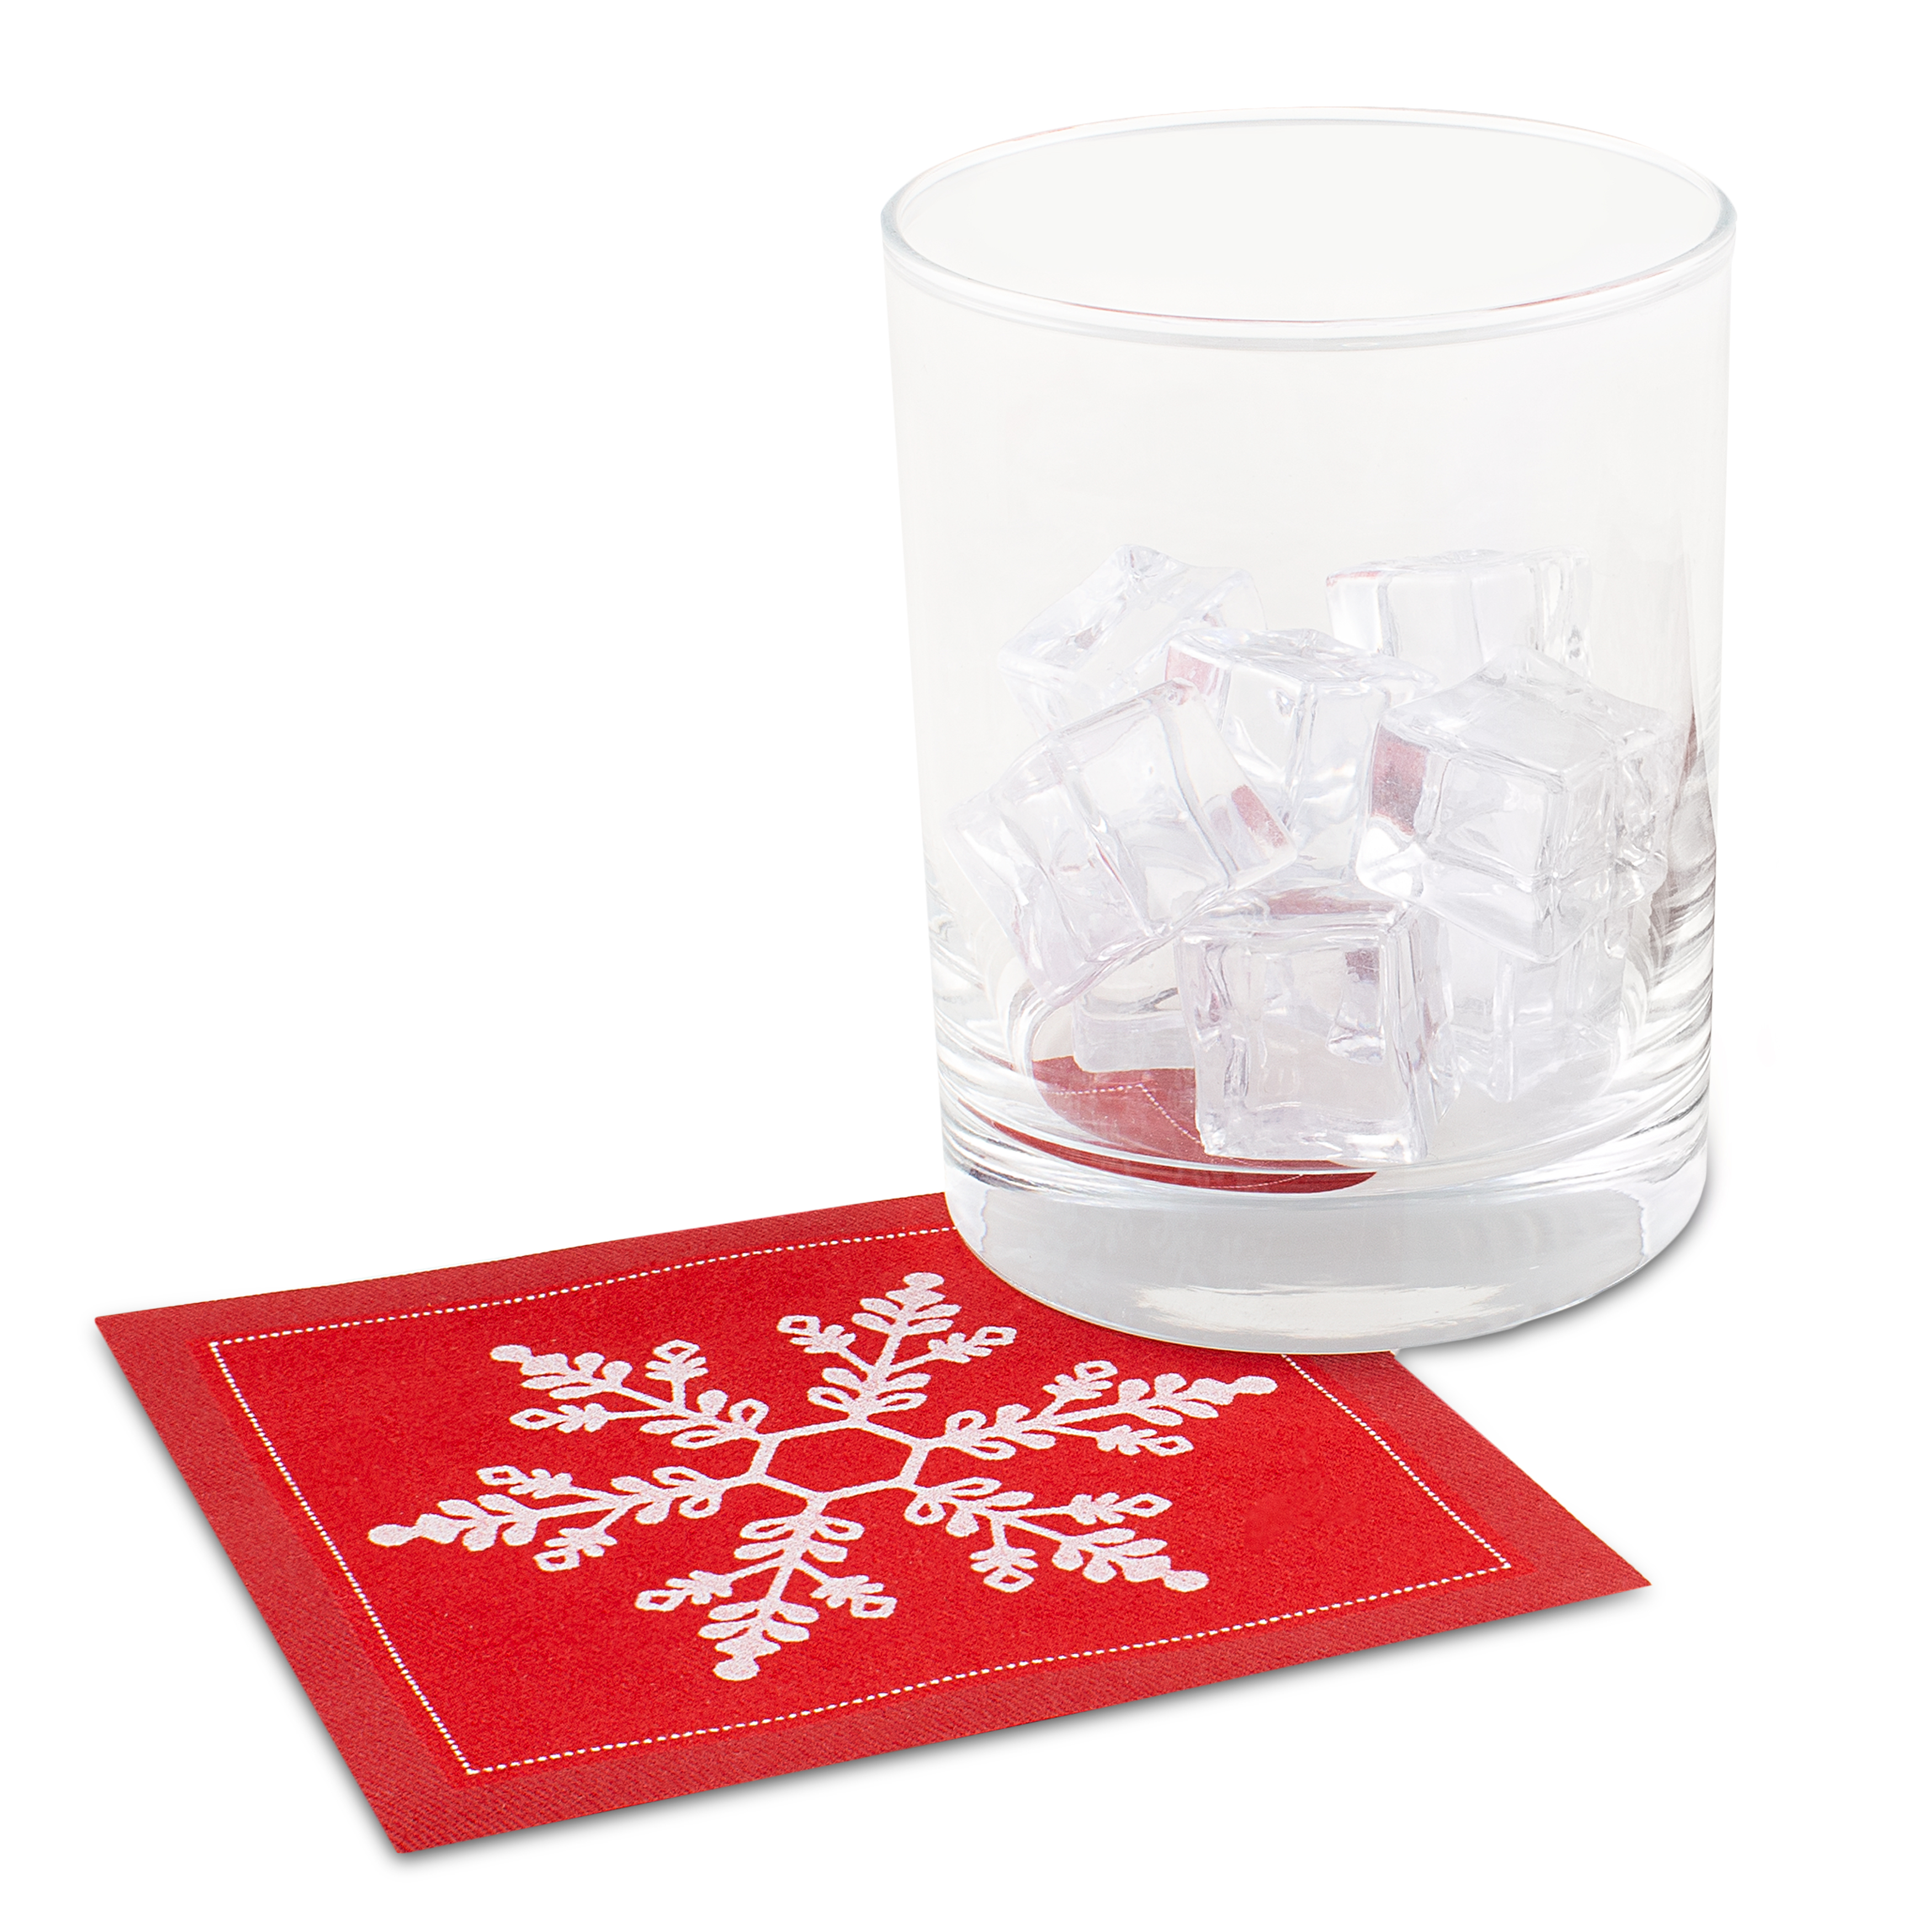 Red Snowflake Cocktail - 100% Organic Cotton (200 GSM) - 4.5" x 4.5" - 1200 Units per Case - 50 Units per Pack